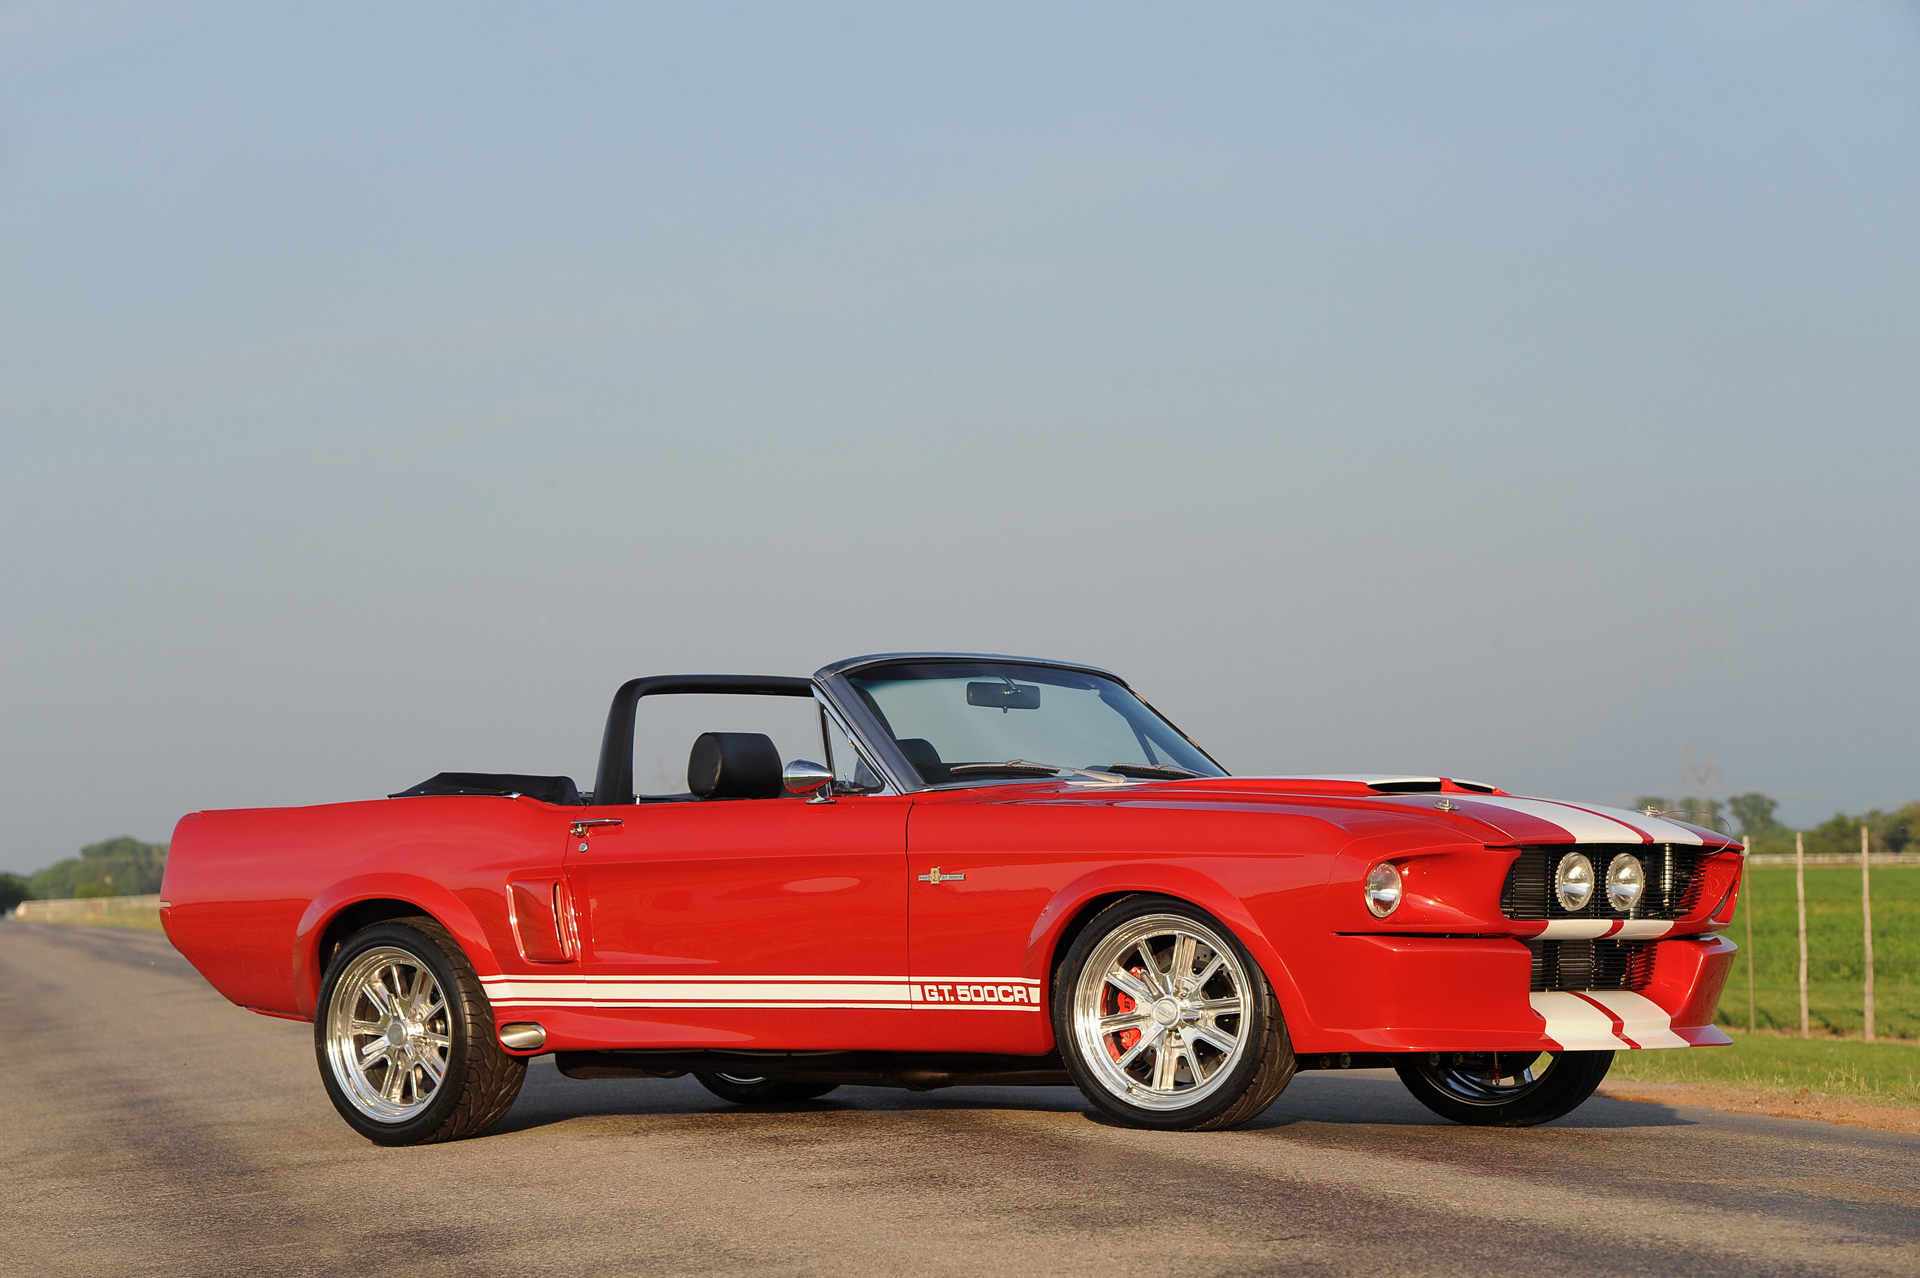 vehicles, shelby gt500 classic recreation, classic car, convertible, muscle car, ford wallpaper for mobile